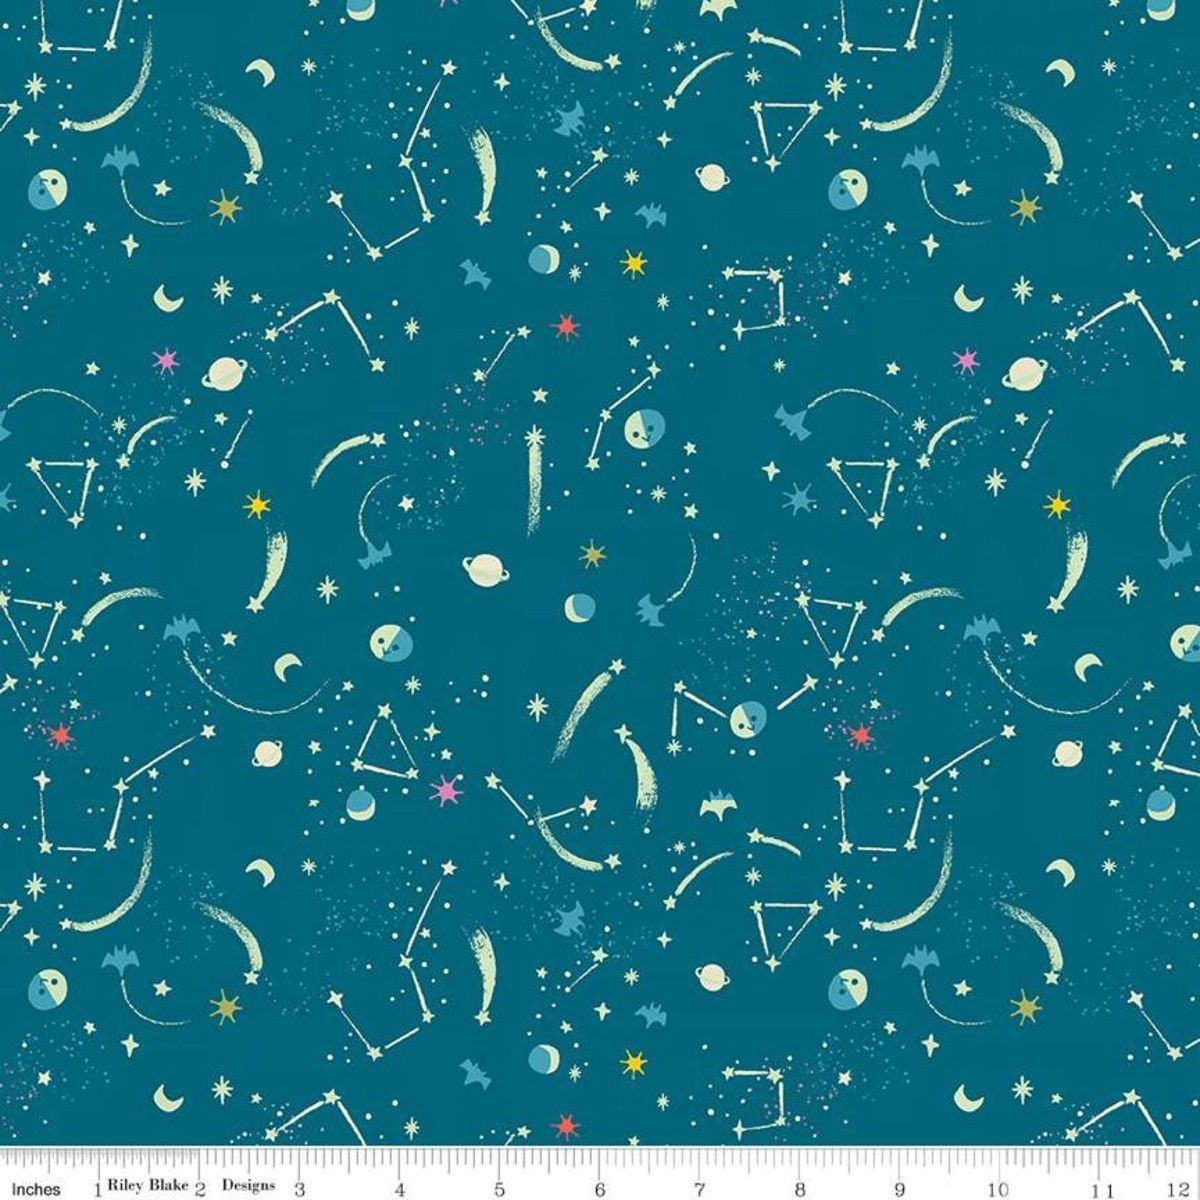 Tiny Treaters by Jill Howarth Milky Way Teal GC10485-TEAL Glow in the Dark Cotton Woven Fabric